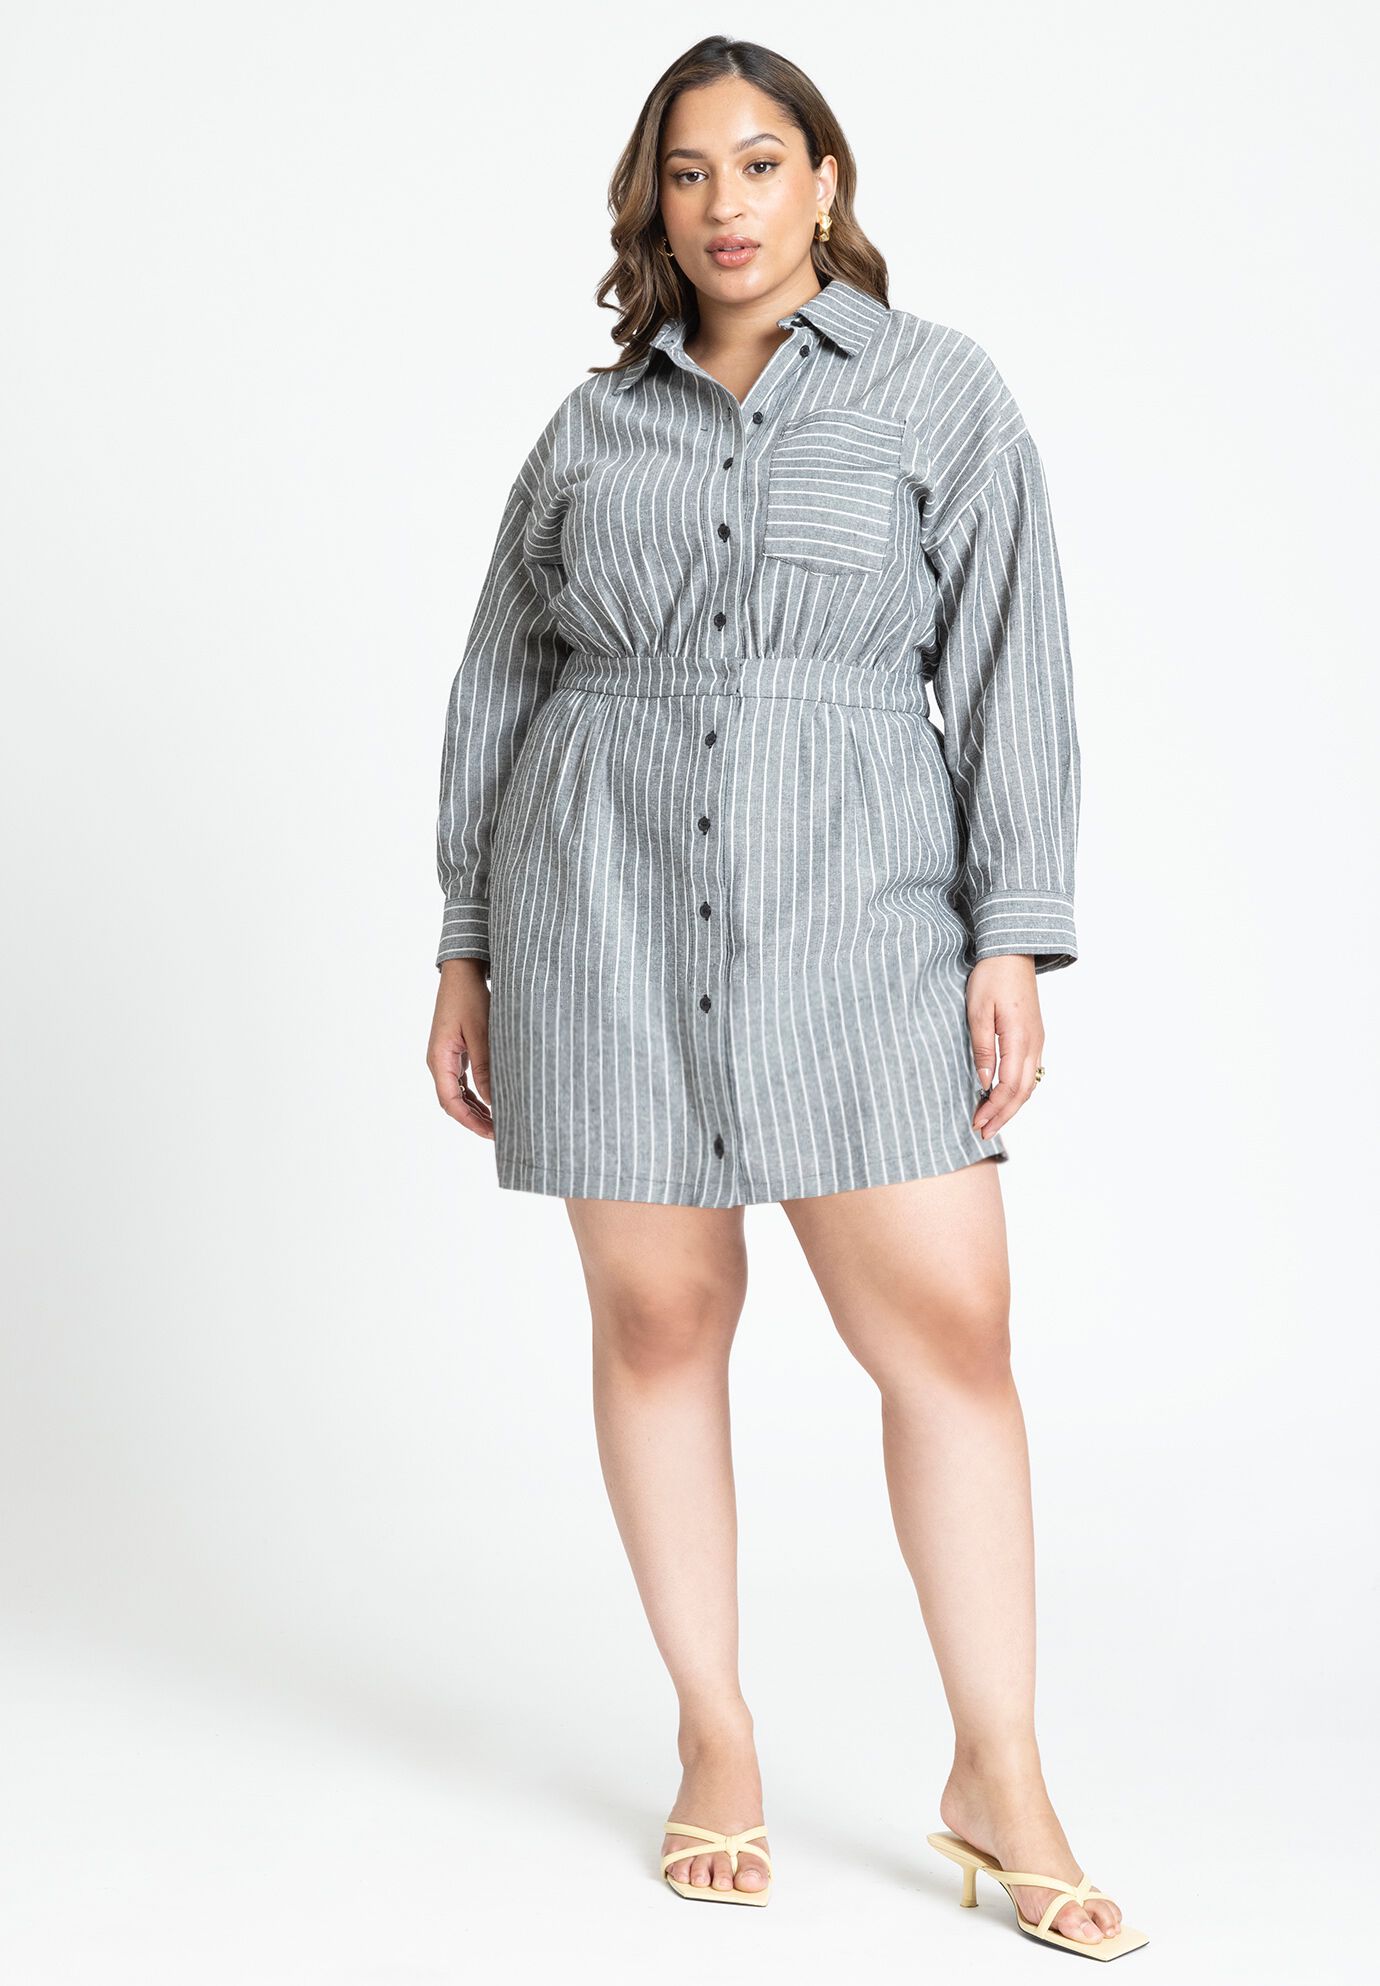 Plus Size Collared Darts Pocketed Back Yoke Above the Knee Striped Print Long Sleeves Dropped Shoulder Elasticized Waistline Romper